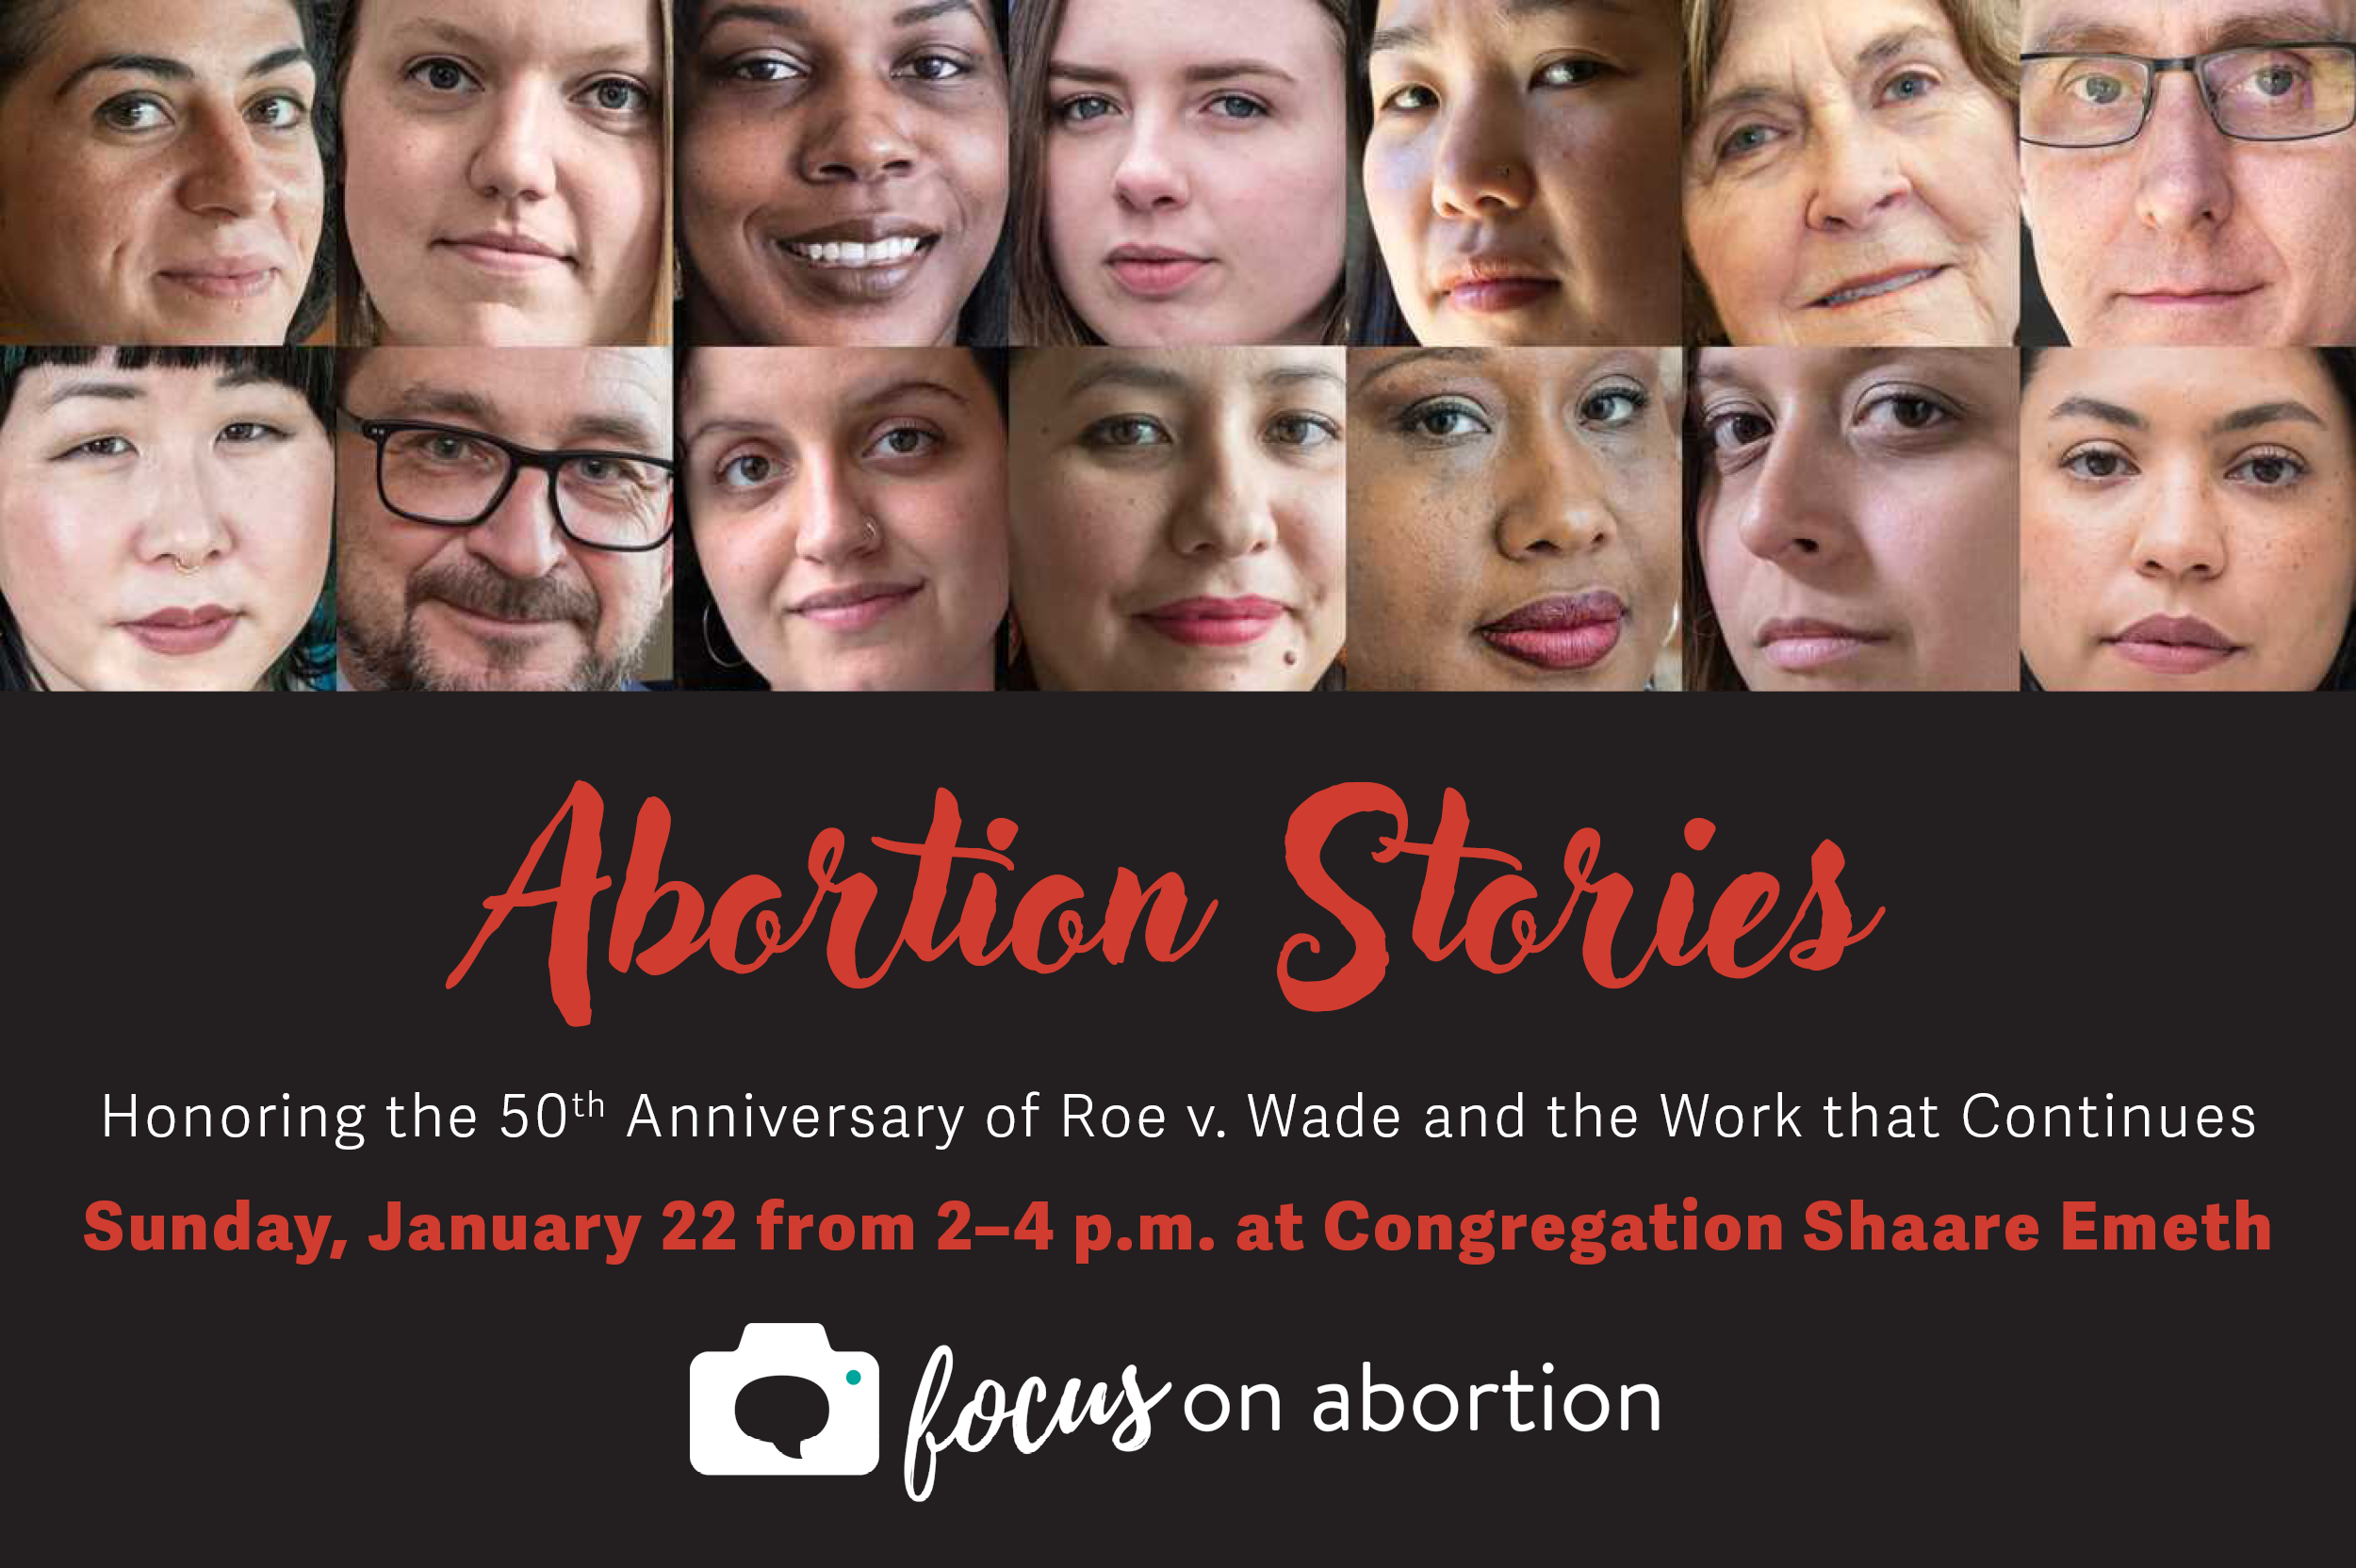 Abortion Stories: Honoring the 50th Anniversary of Roe v. Wade and the Work that Continues